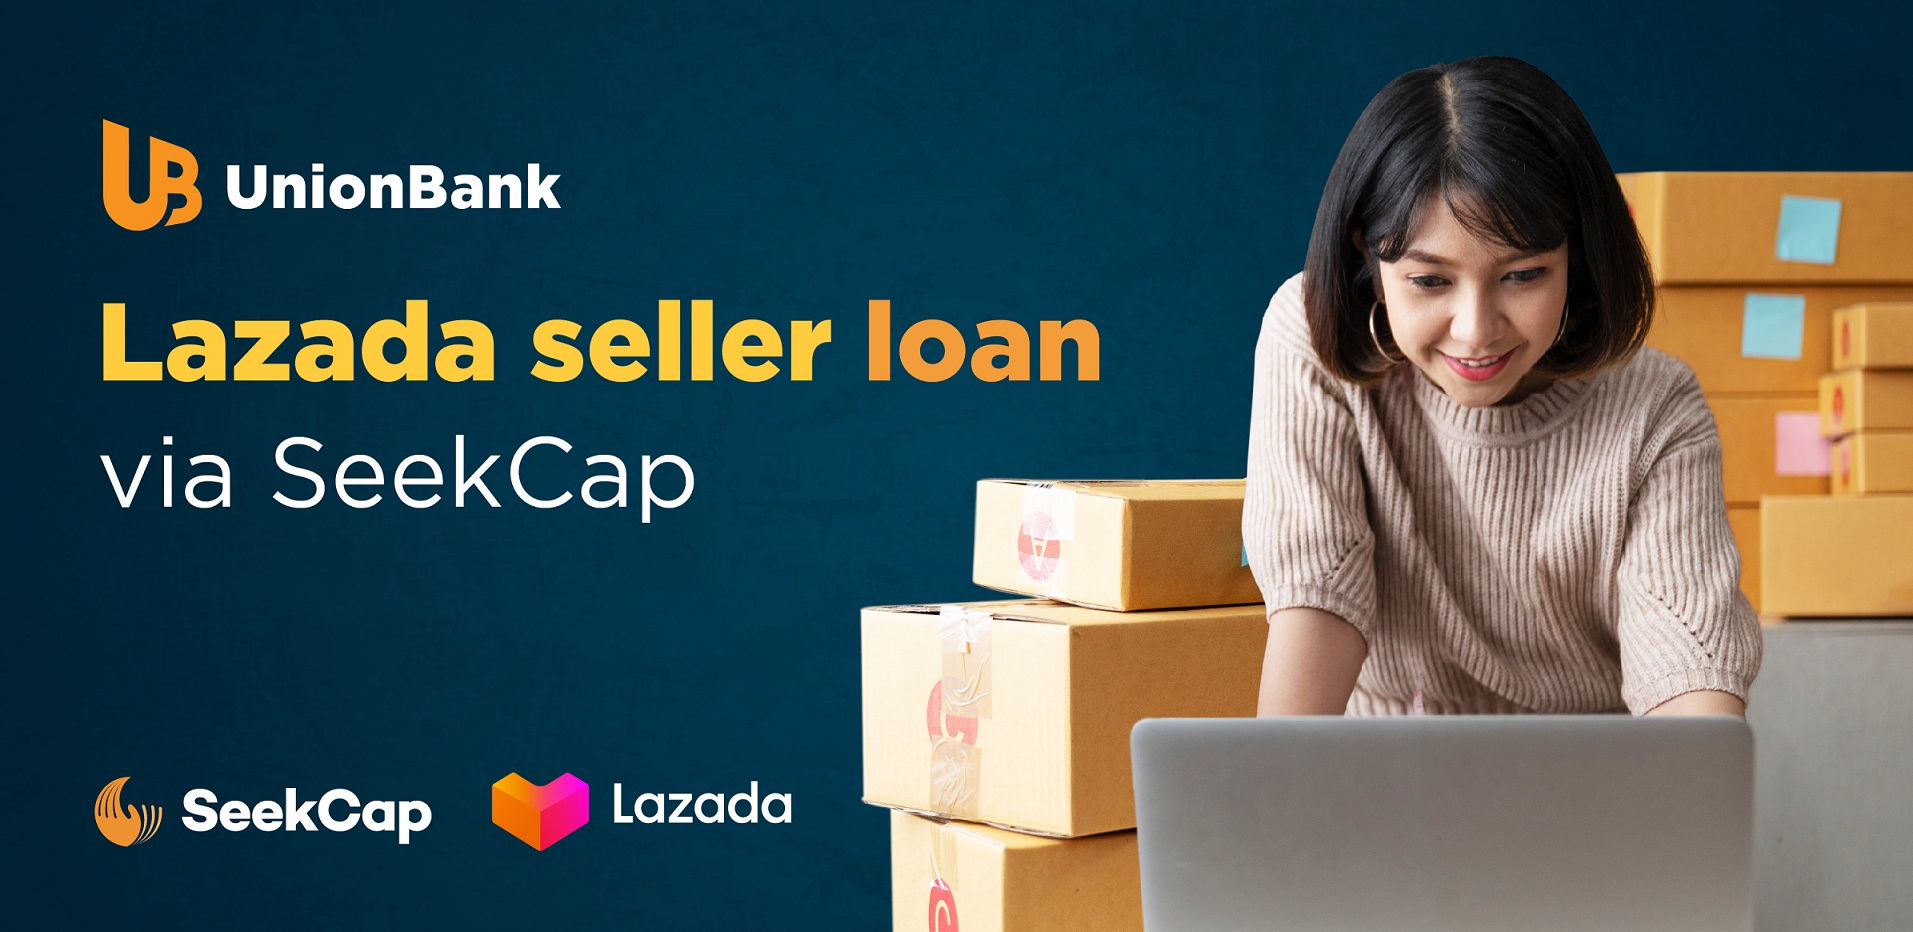 SeekCap by UBX Transforms Credit for LAZADA Sellers